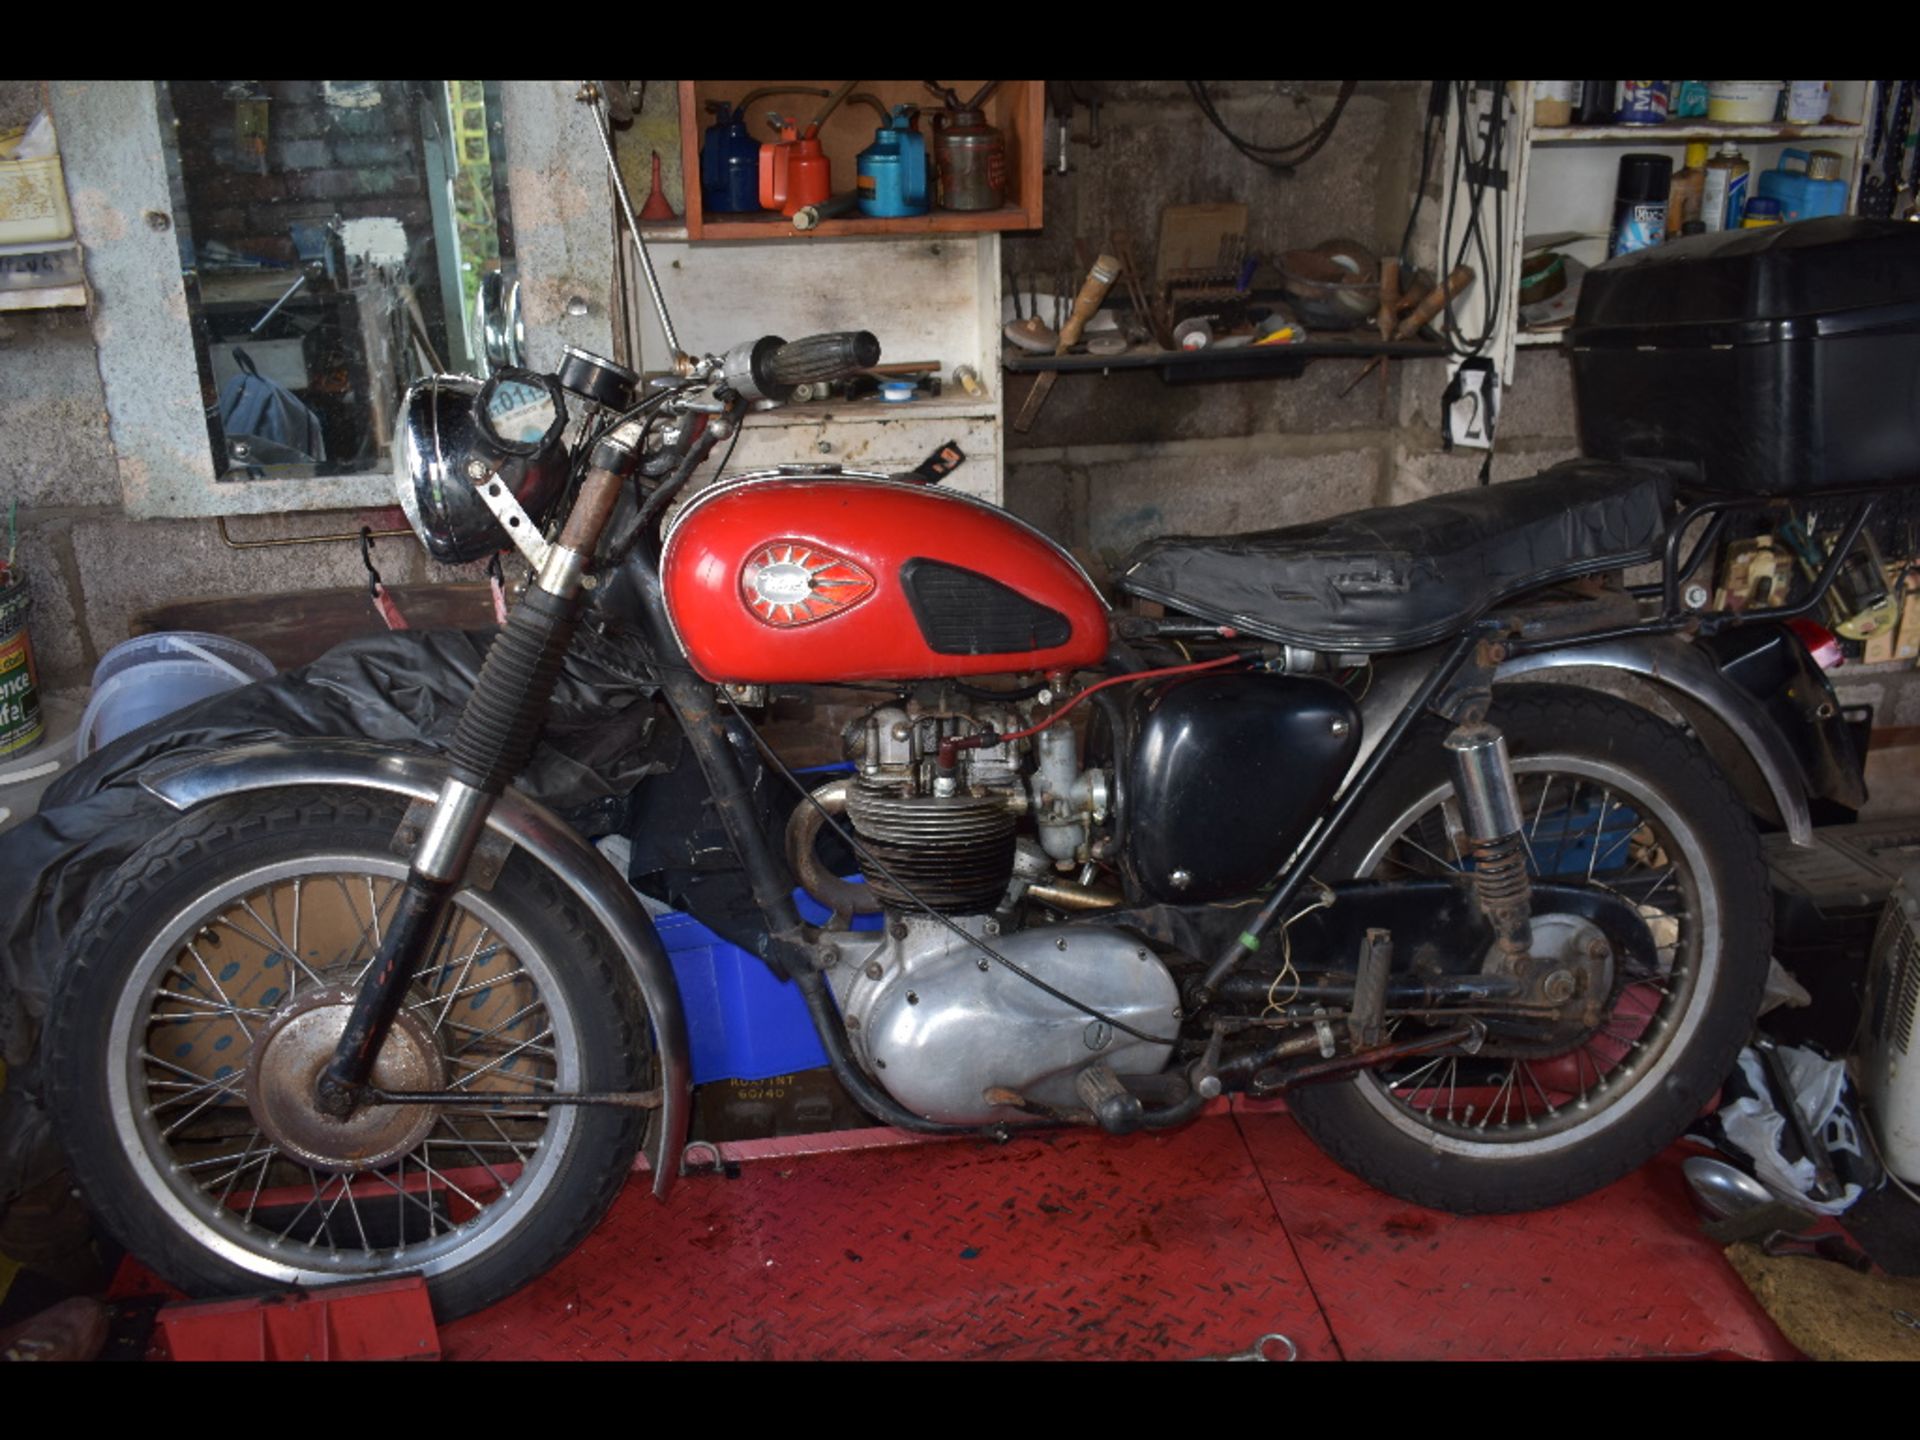 A 1964 BSA B40, registration number AHM 52B, frame number 2780, engine number SS555. From a